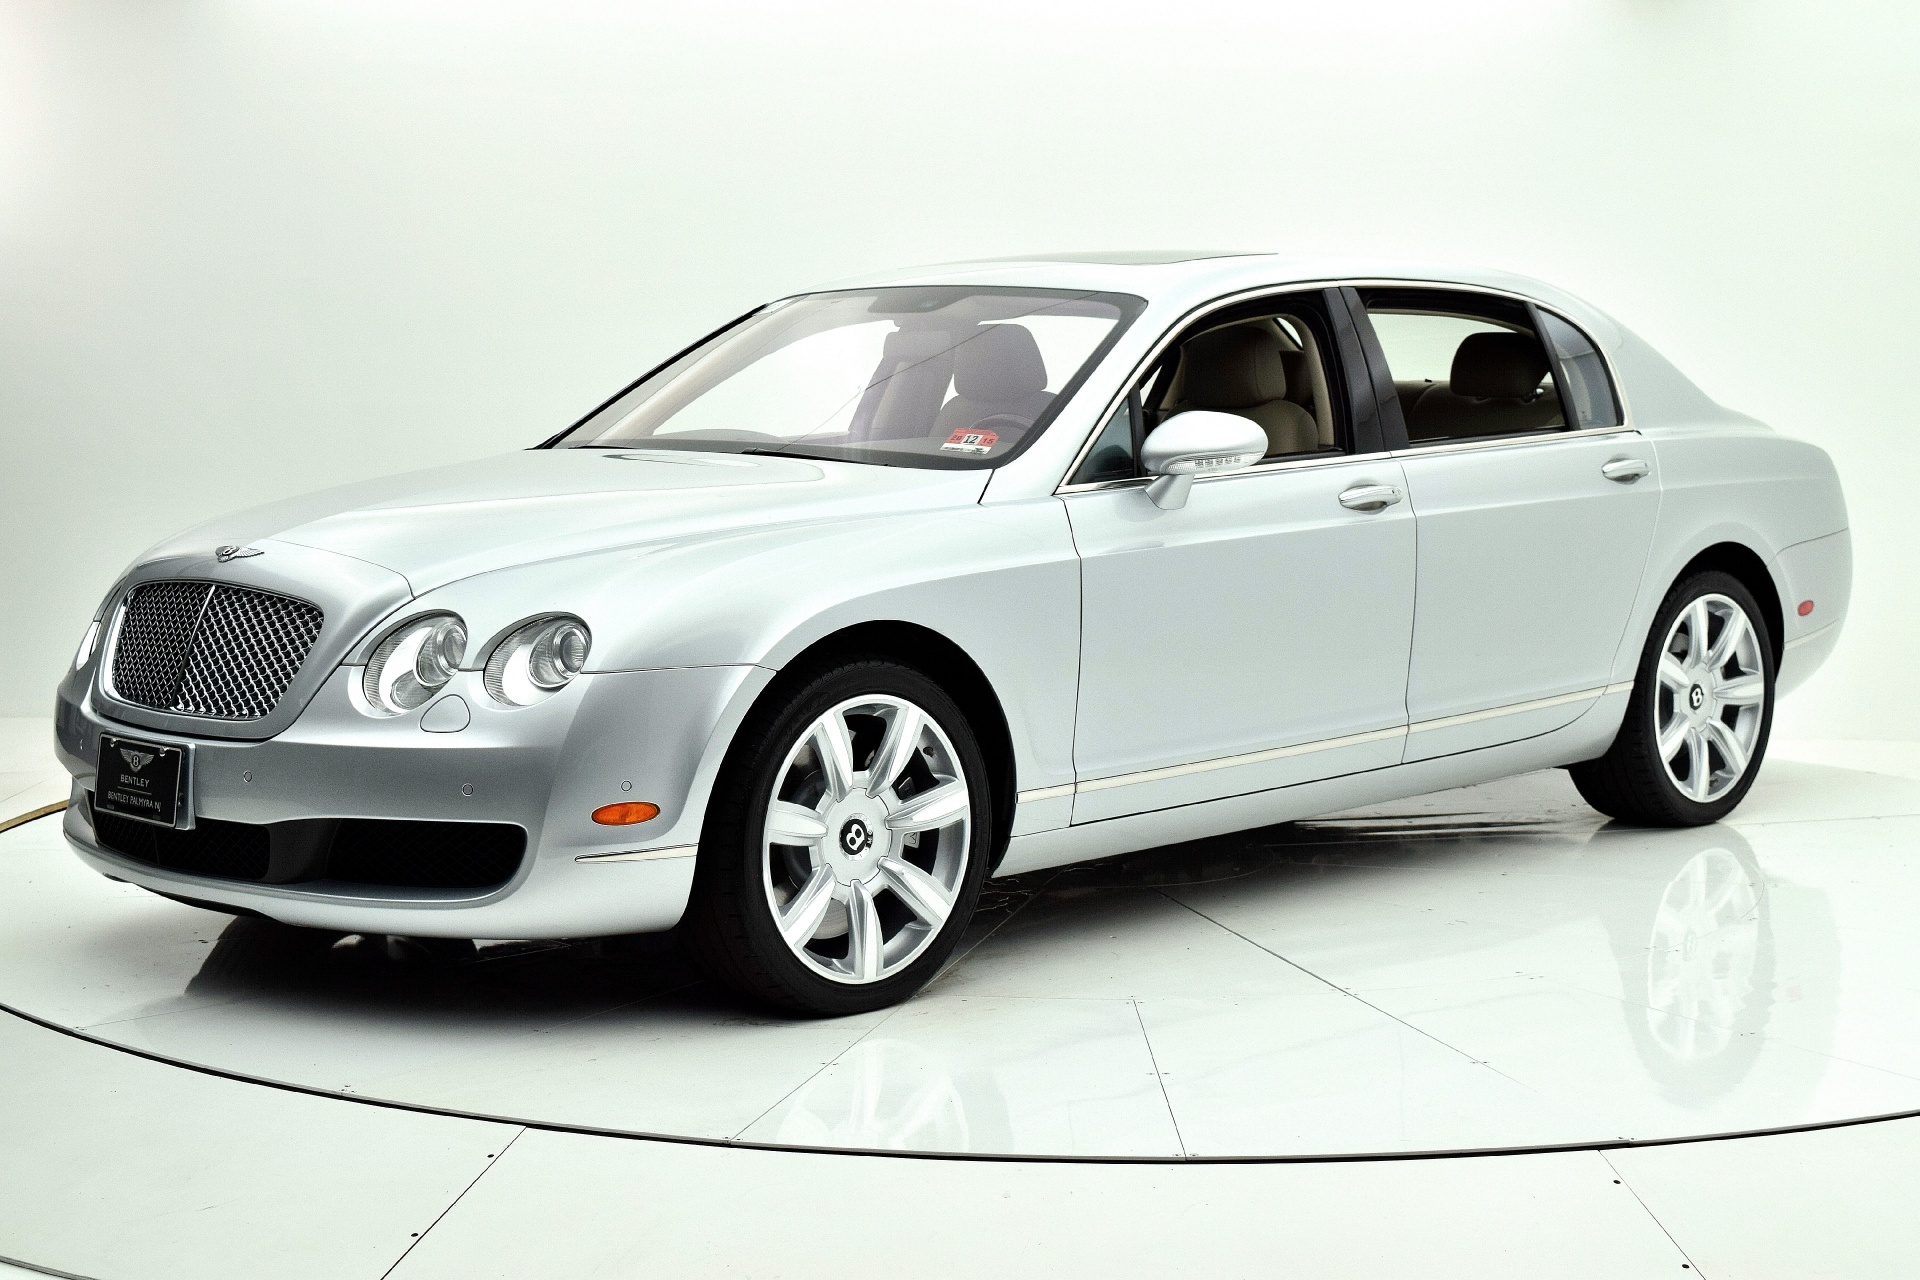 Used 2006 Bentley Continental Flying Spur for sale Sold at Bentley Palmyra N.J. in Palmyra NJ 08065 2